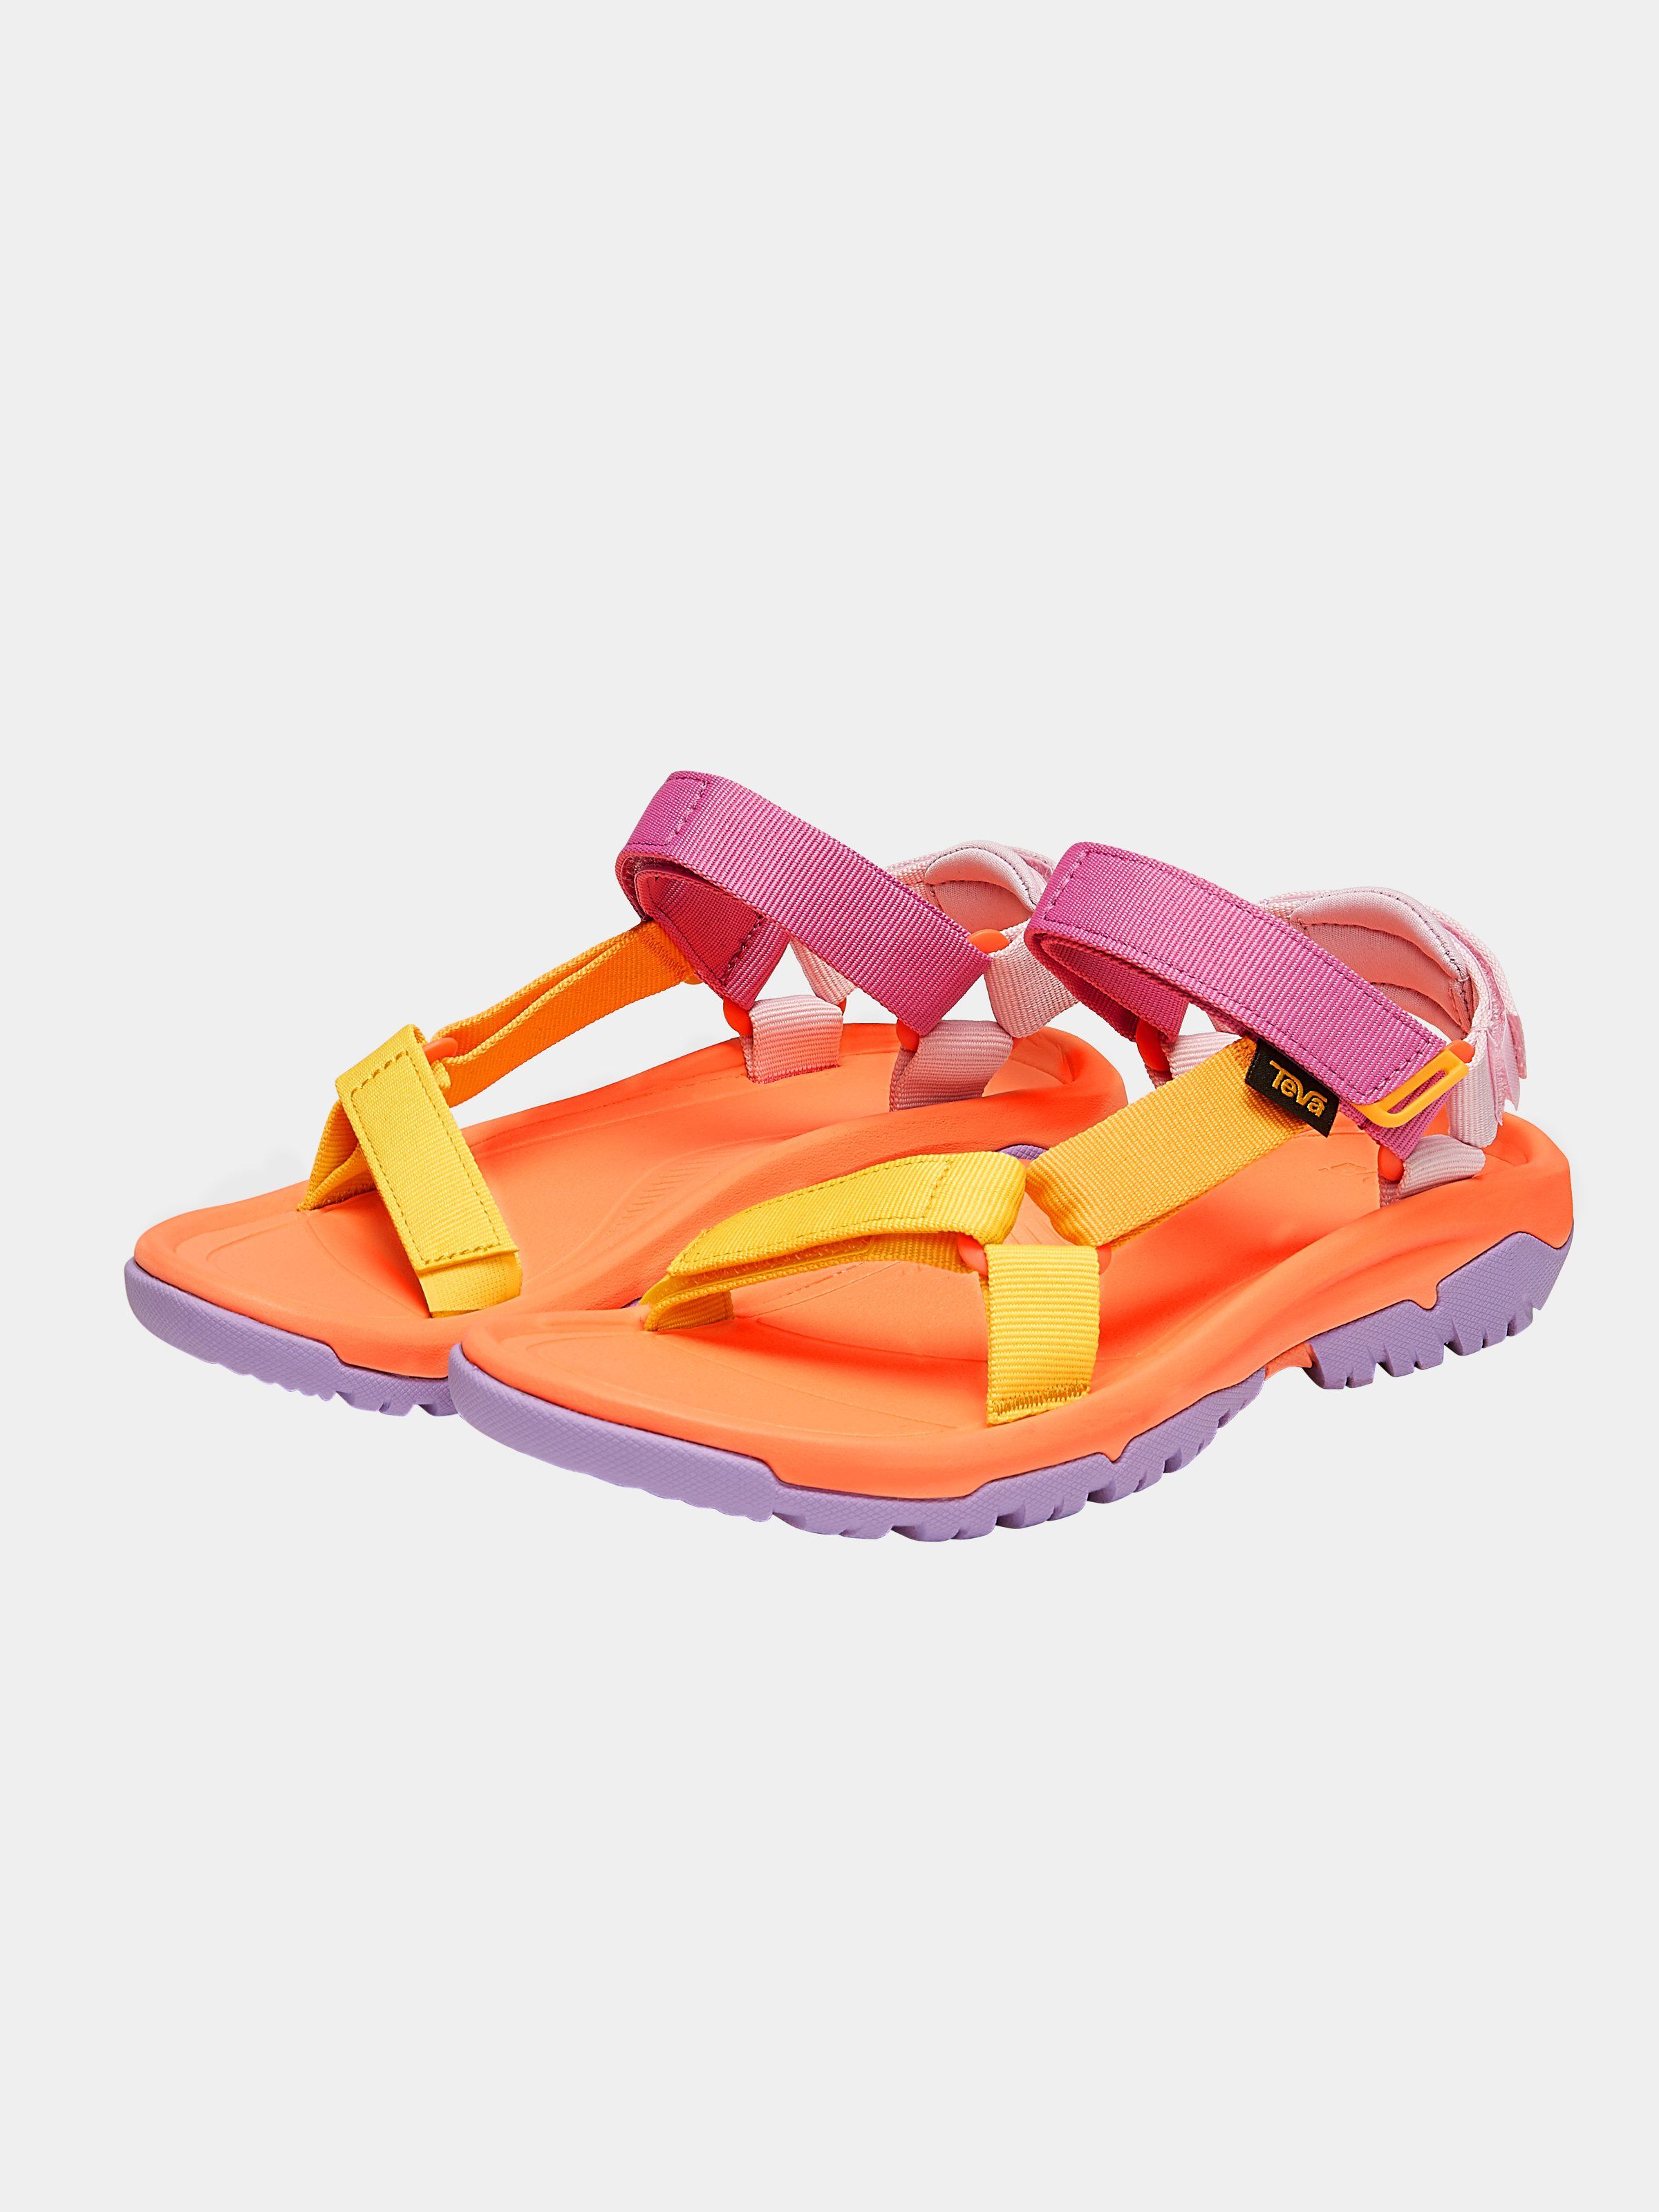 where can you buy teva sandals